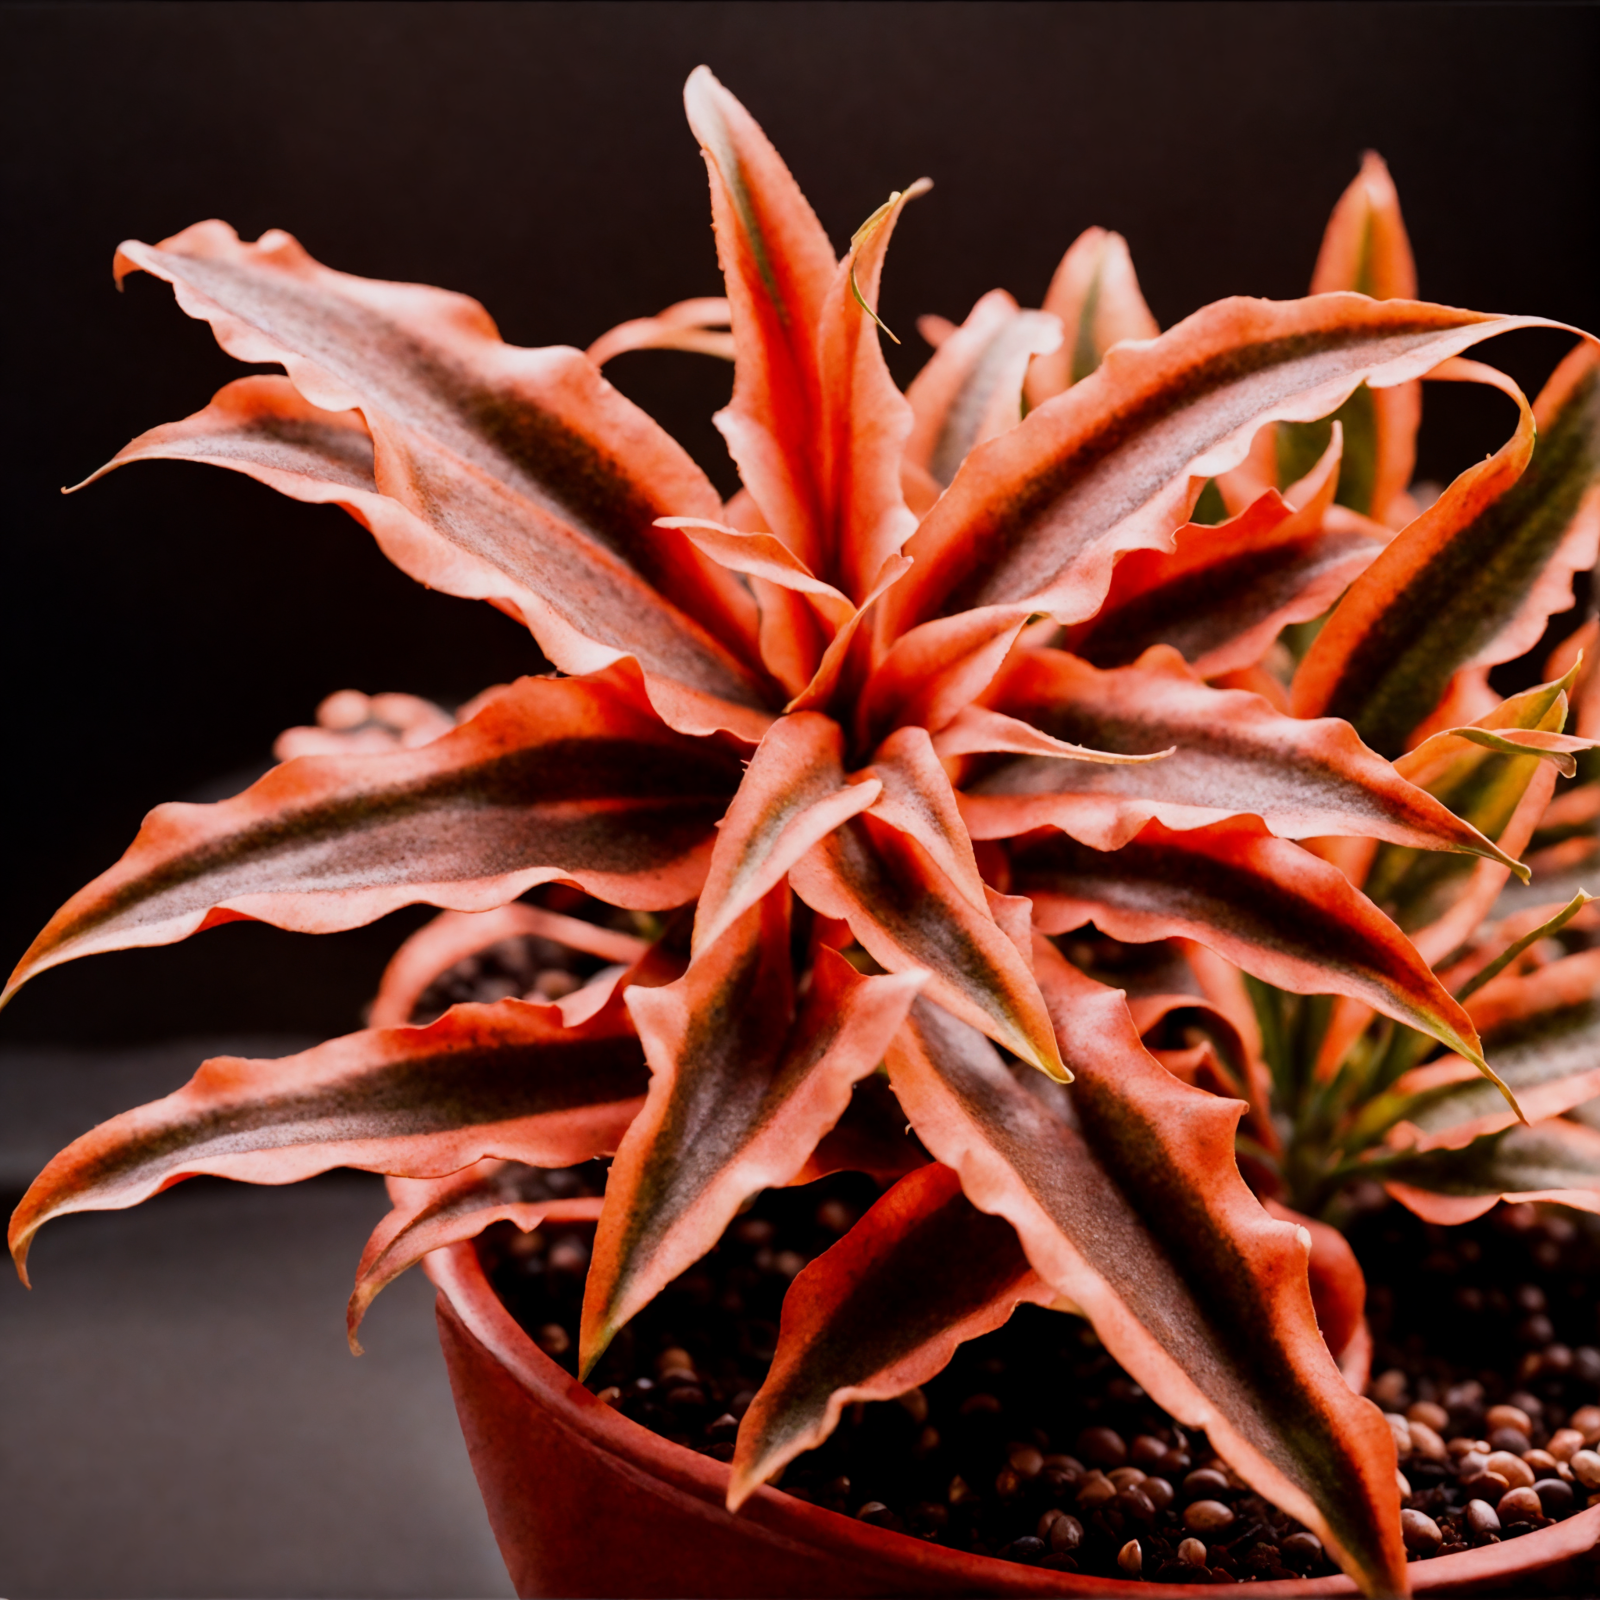 Cryptanthus bivittatus with red leaves in a bowl planter, clear lighting, against a dark background.